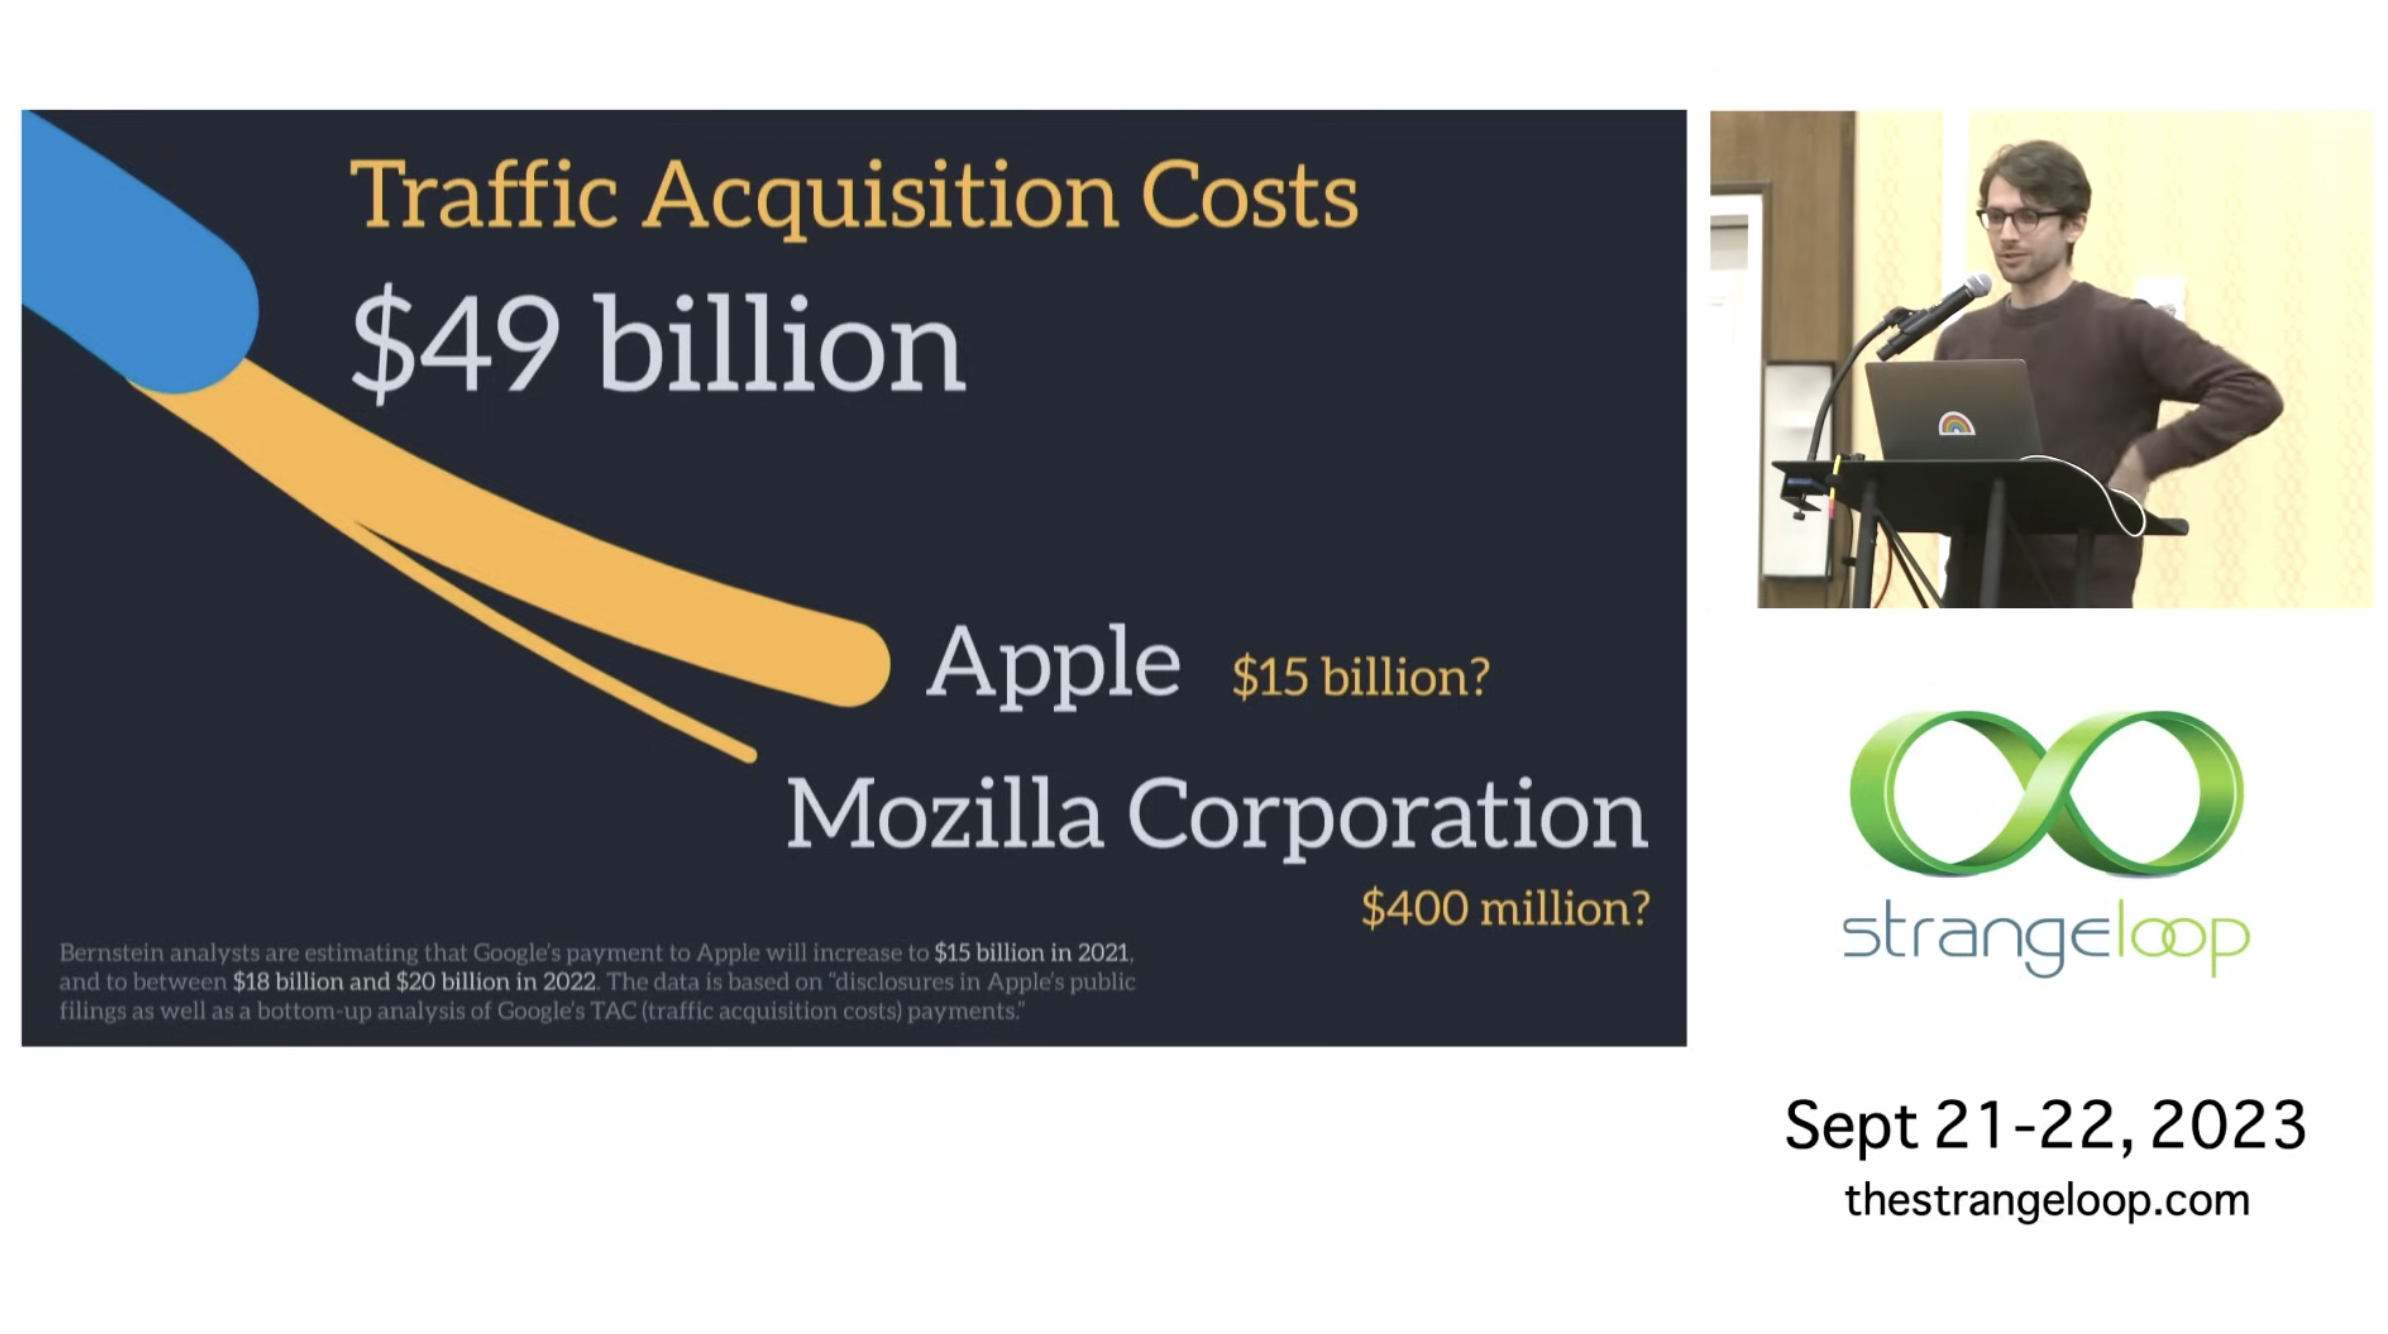 Screenshot from Evan’s talk at Strangeloop showing Google’s traffic acqisition of $49 billion, with Apple getting $15 billion of that and Mozilla $400 million.